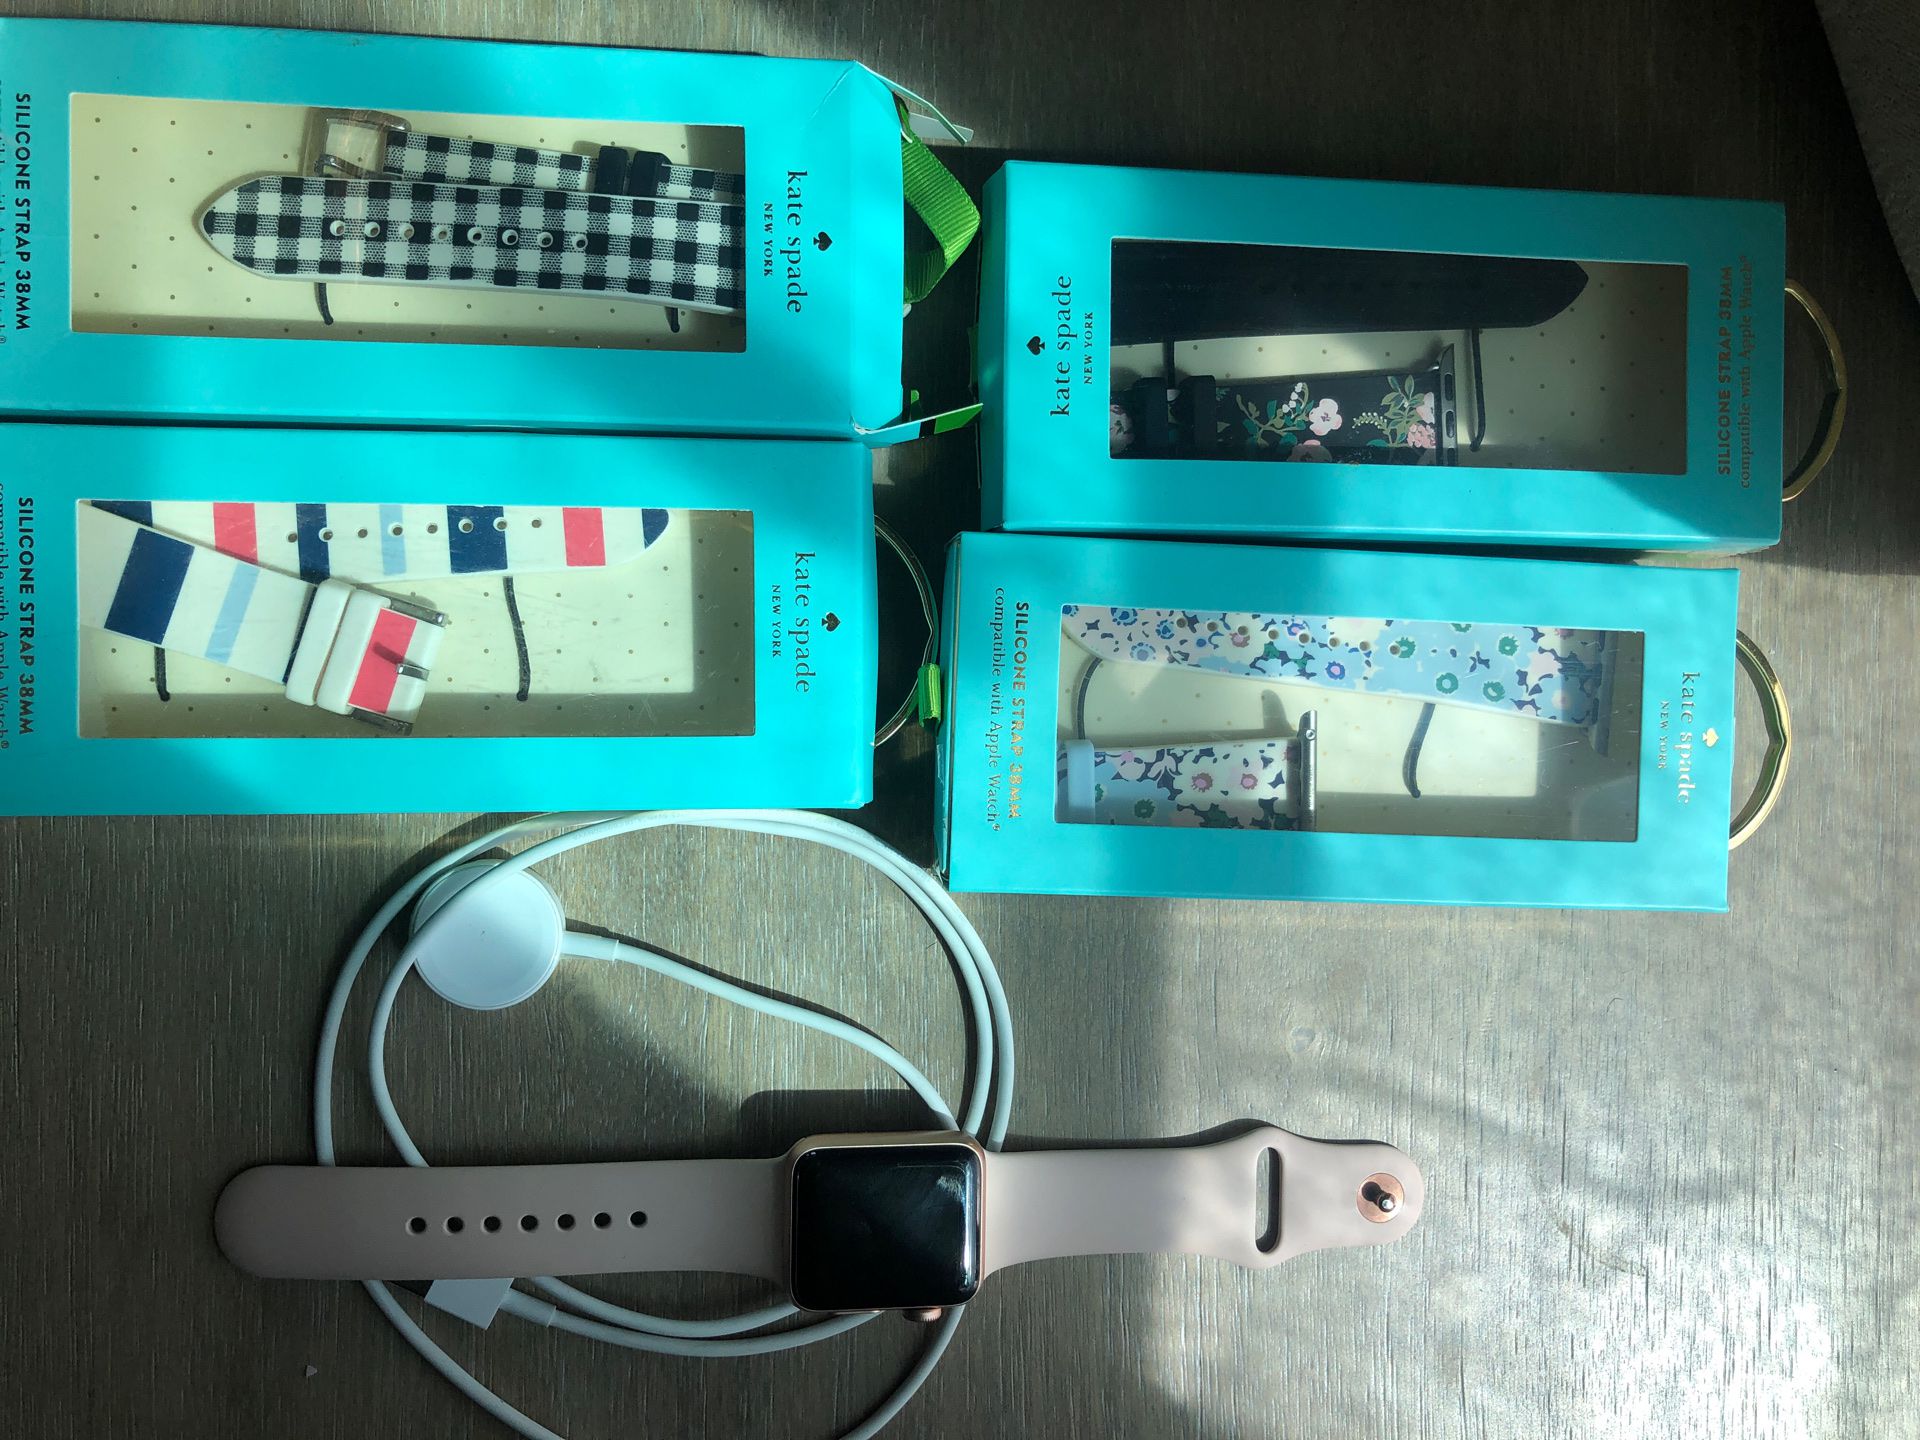 Apple Watch (3series), 4 kate spade straps, charger